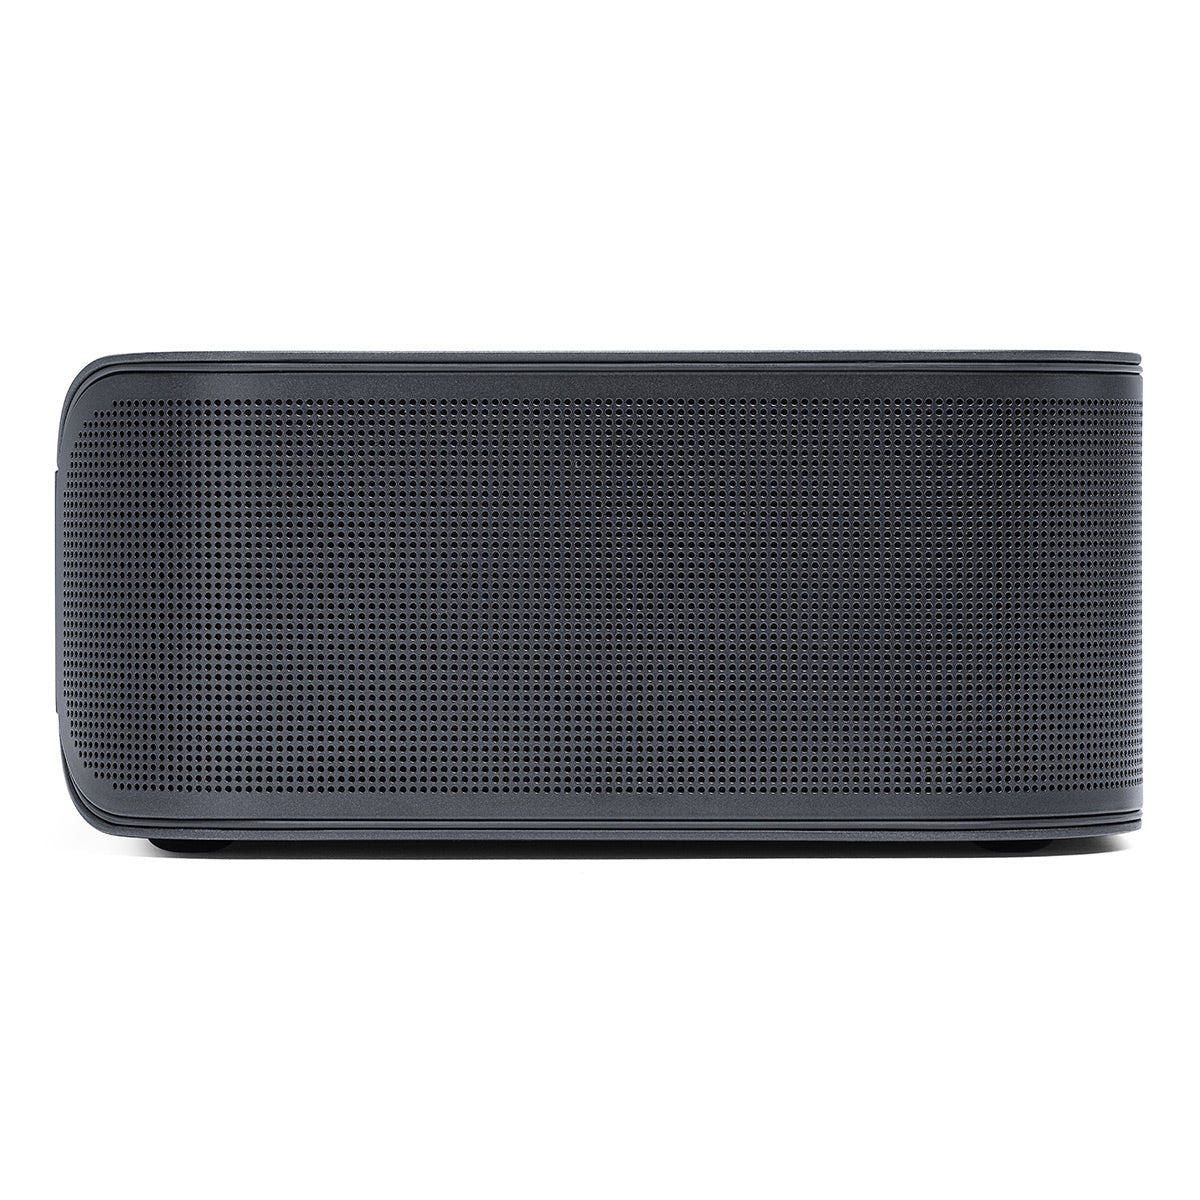 JBL Bar 1300X Pro 11.1.4 Soundbar with 12" Wireless Subwoofer and Detachable Rear Speakers